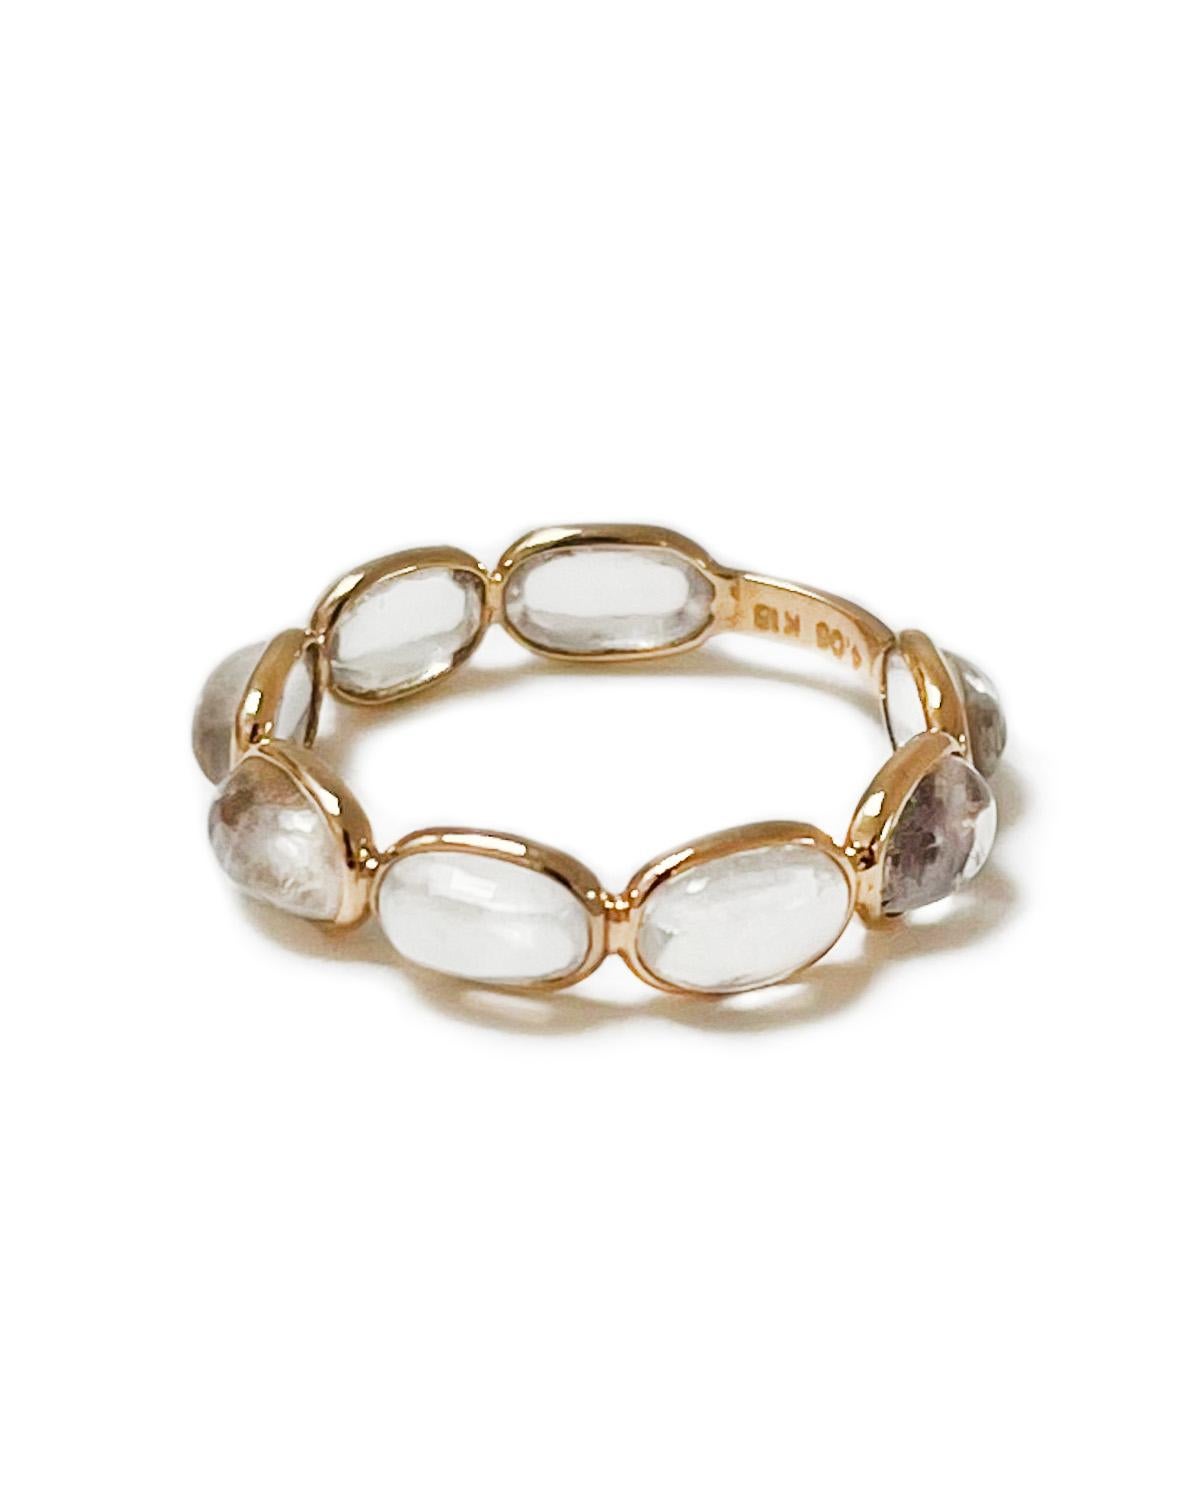 Intention: Stack it on

Dorian's Find: ﻿Bubbly oval moonstones in an 18k yellow gold spectacle setting? Sign me up! This wonderfully feminine vintage find is simply charming. The moonstone is fairly translucent and looks great with every skin